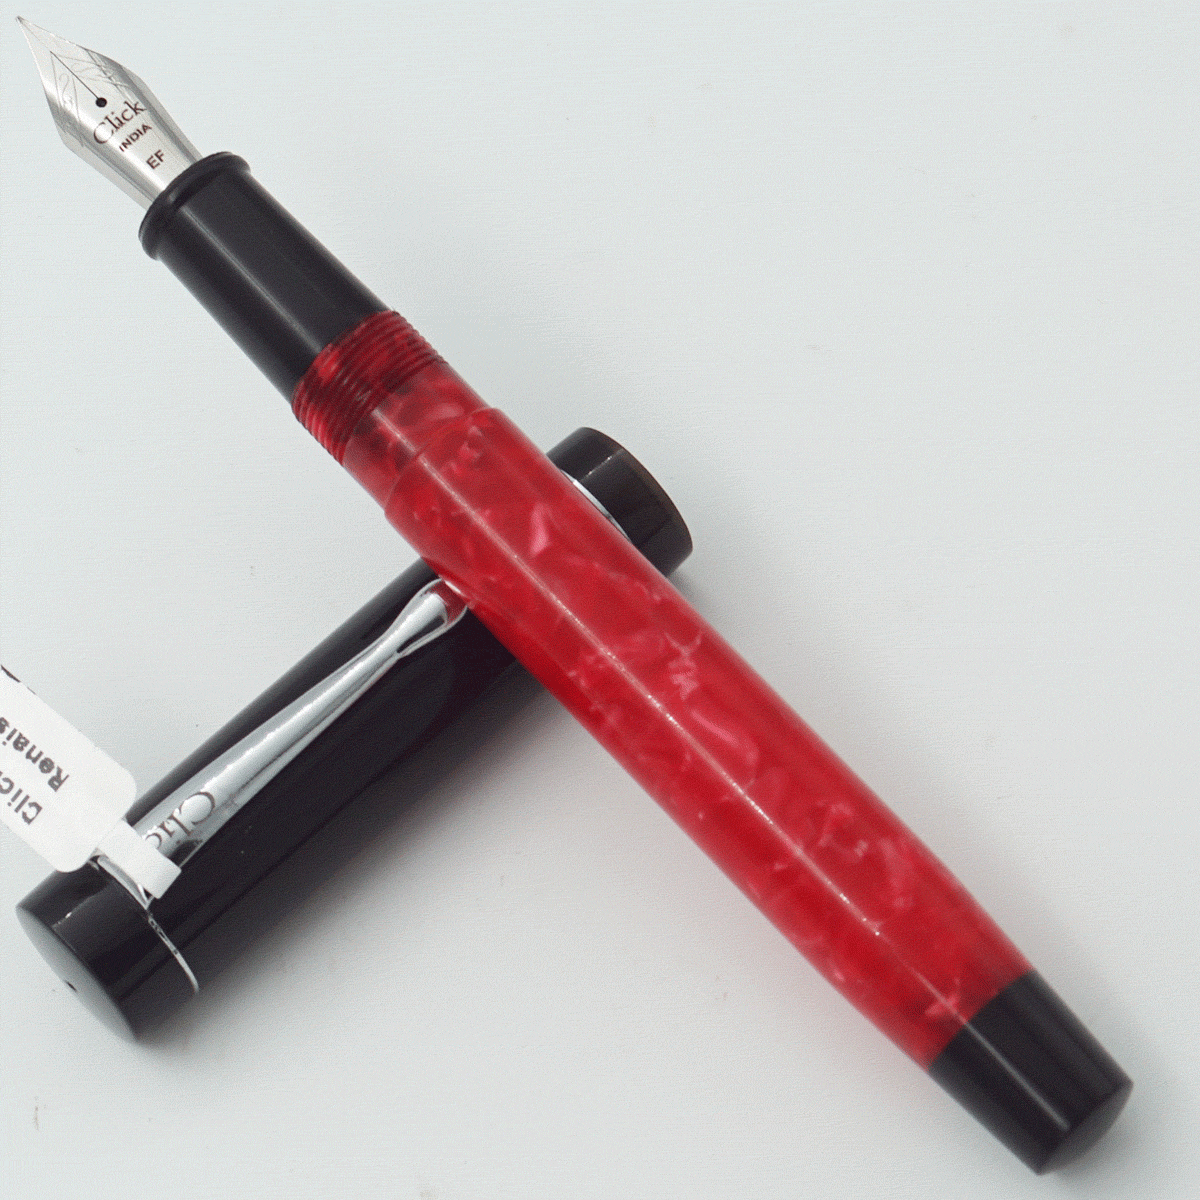 Click Renaissance Red Color Acrylic Body With Black Color Cap And Silver Clip No 35 SSF EF Nib Eye Dropper Model Fountain Pen (3 in 1) (Nib Can be Customised) SKU 24031